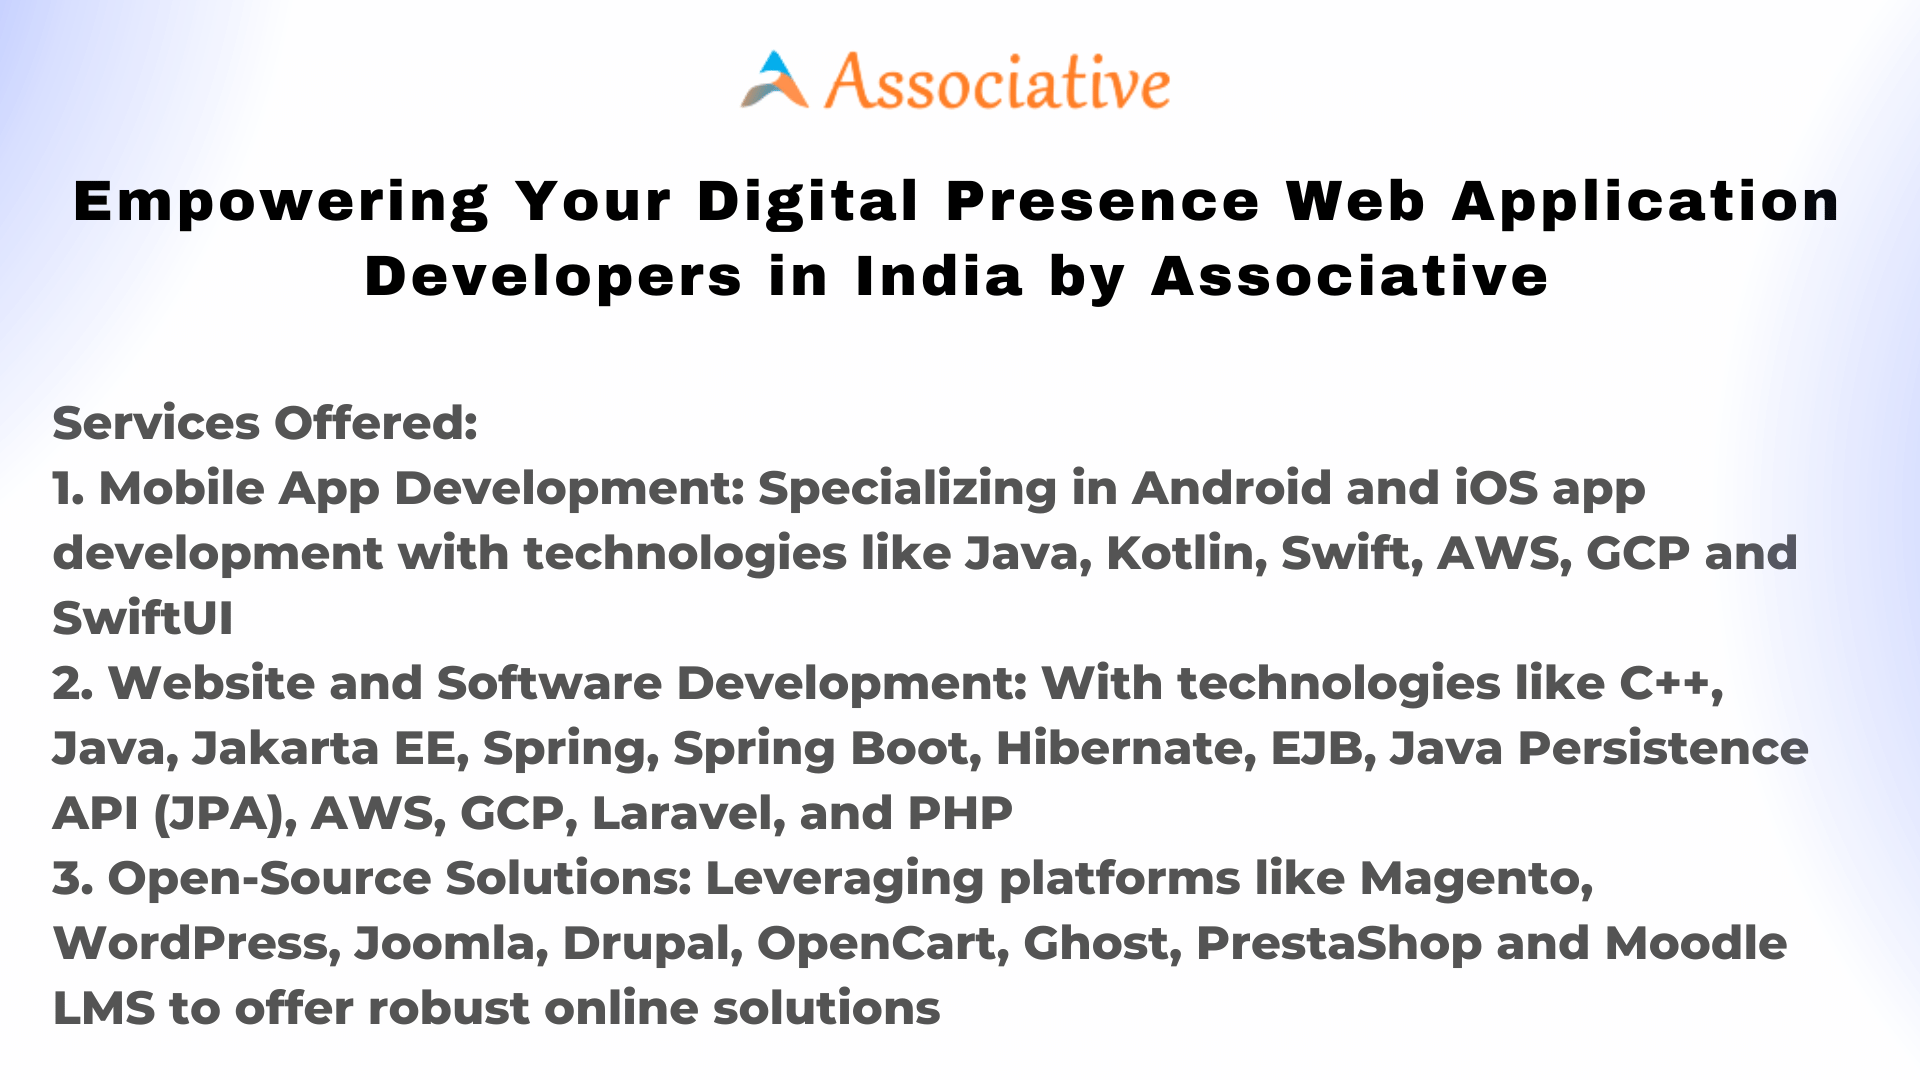 Empowering Your Digital Presence Web Application Developers in India by Associative